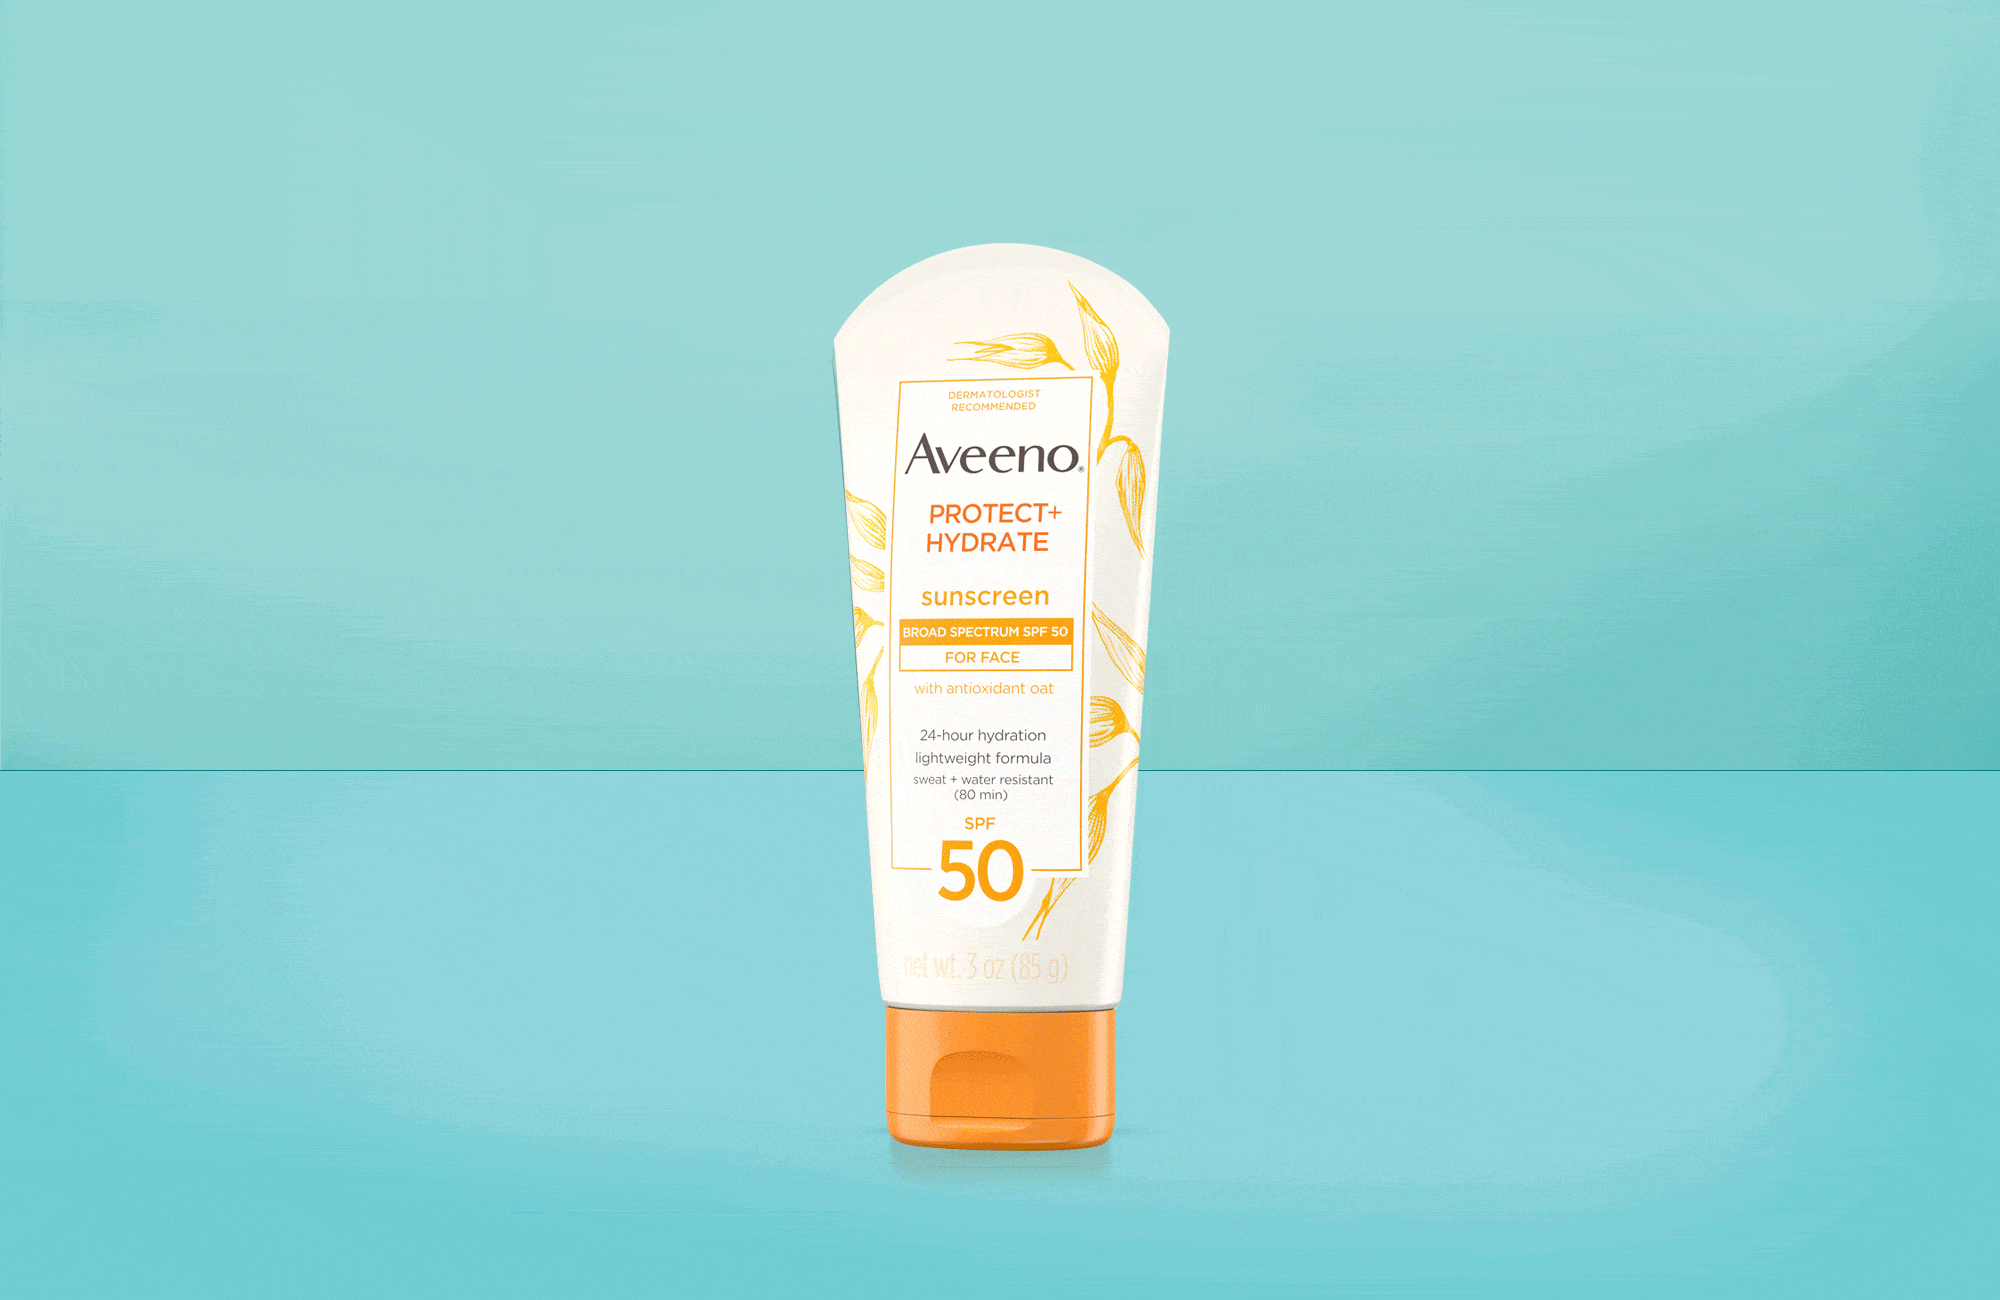 best sunscreen for woman's face